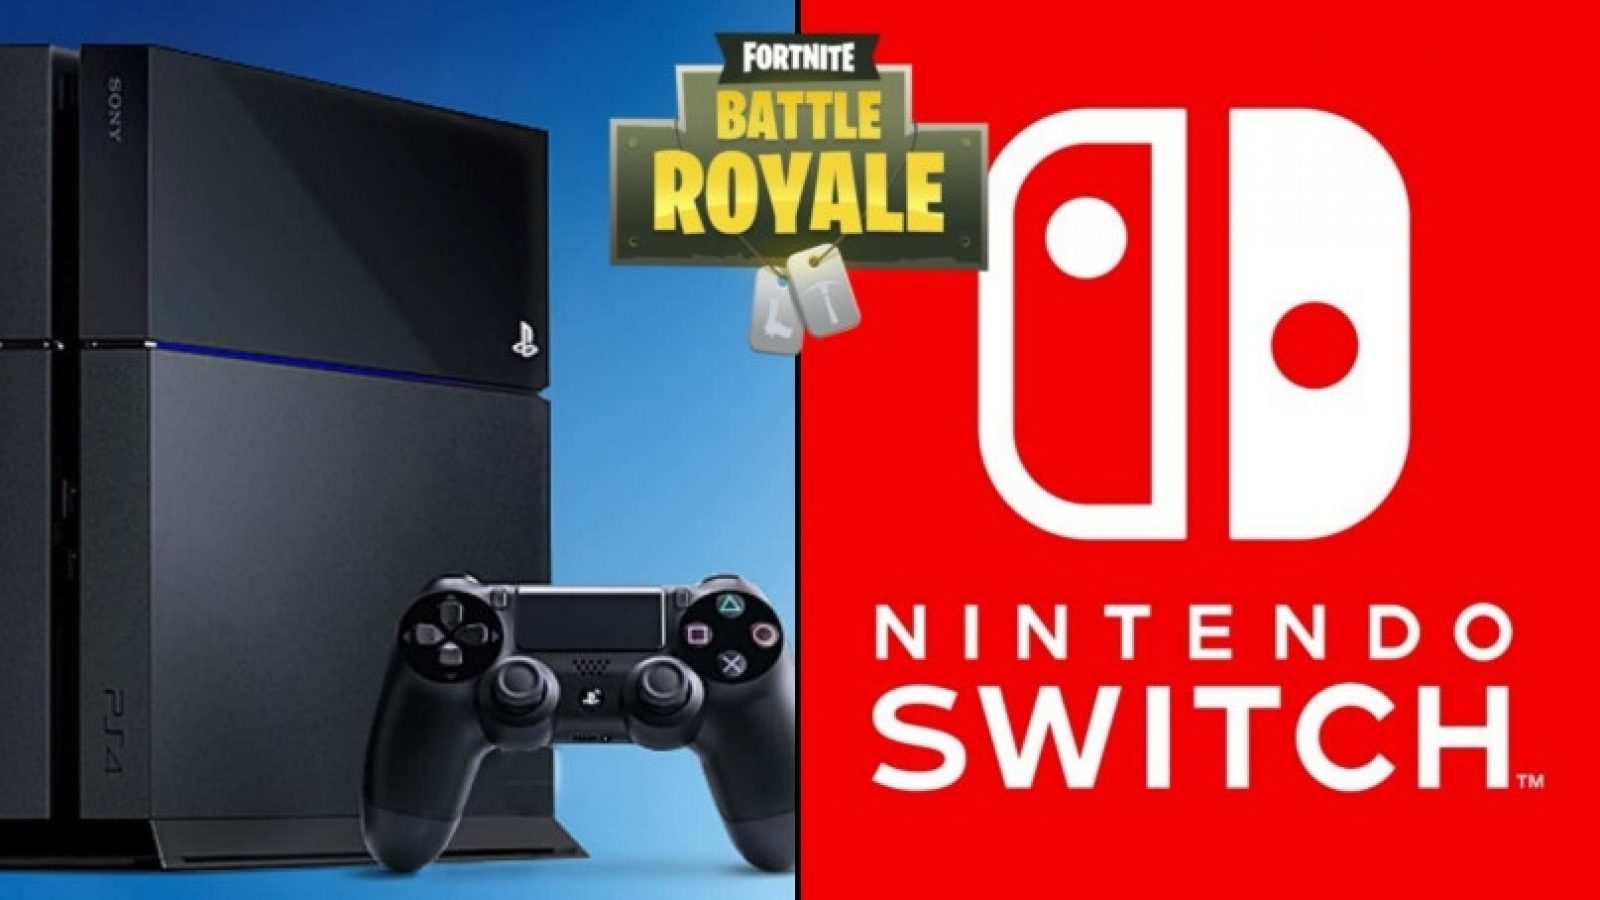 Sony enables Fortnite cross-play between PS4, Xbox One and Nintendo Switch